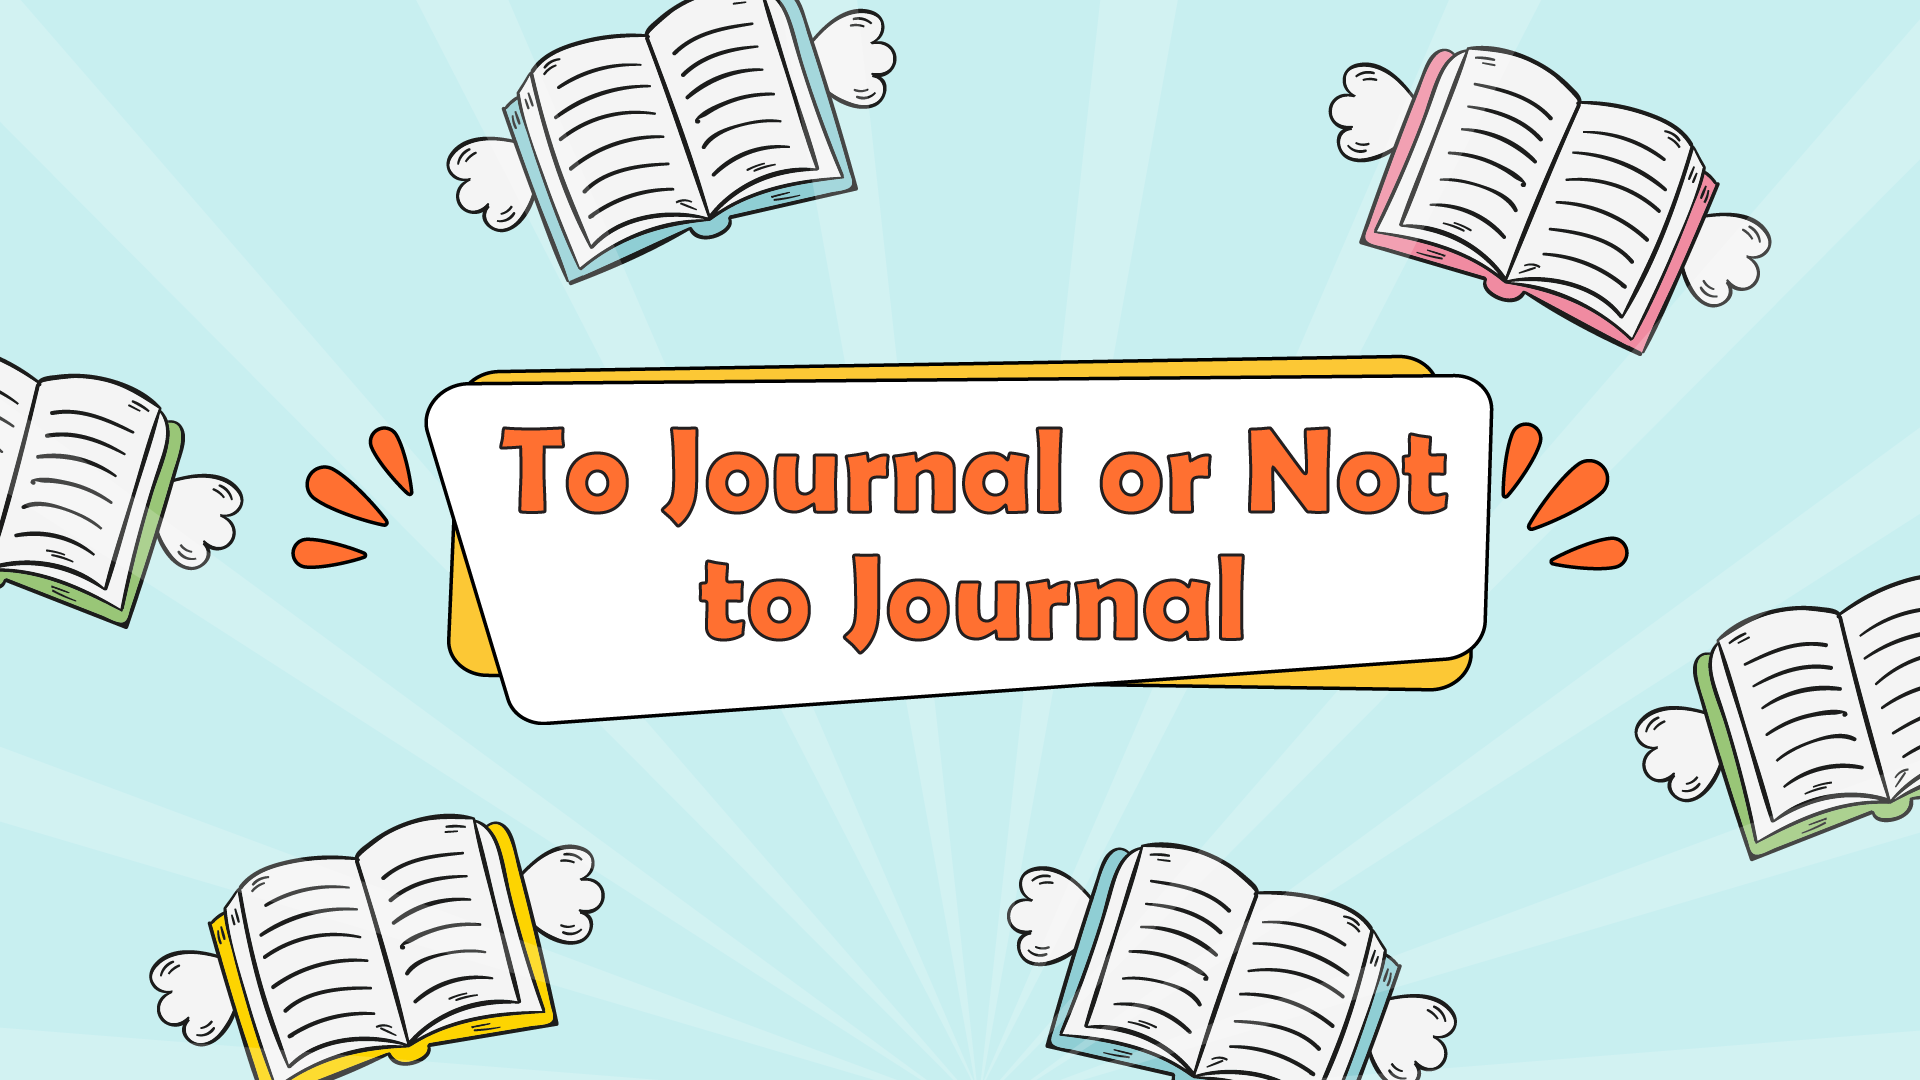 ”To Journal or Not to Journal” – 8 Tremendous Benefits of Journaling for Kids